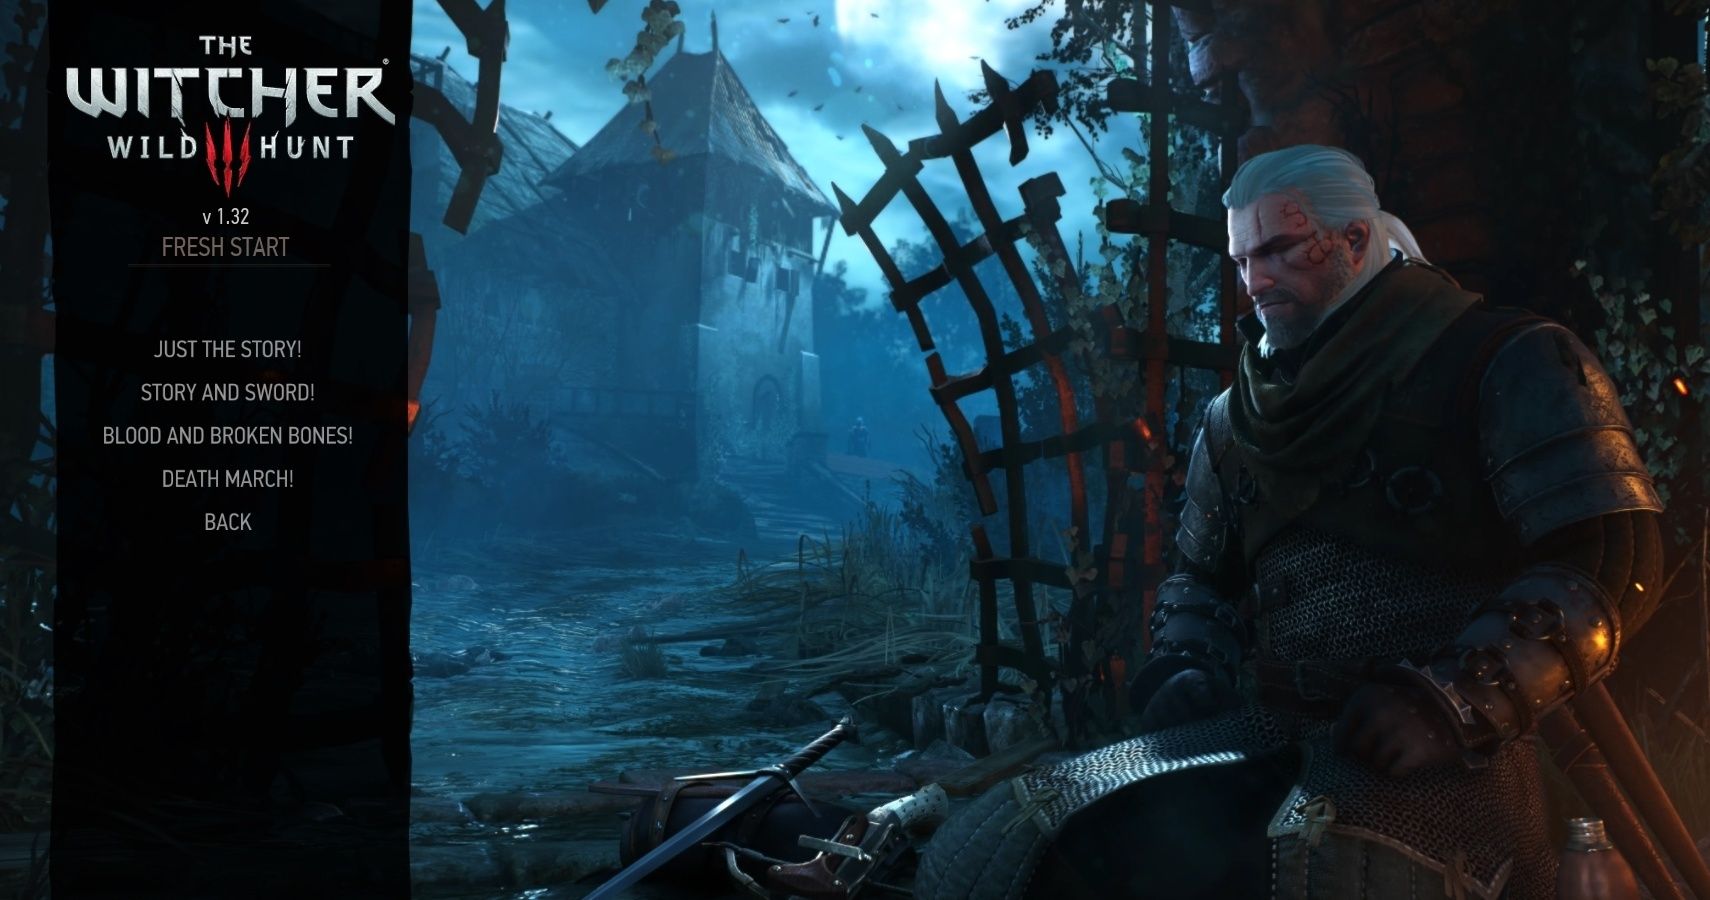 The Witcher 3 10 Tips For Completing The Game On Death March Difficulty